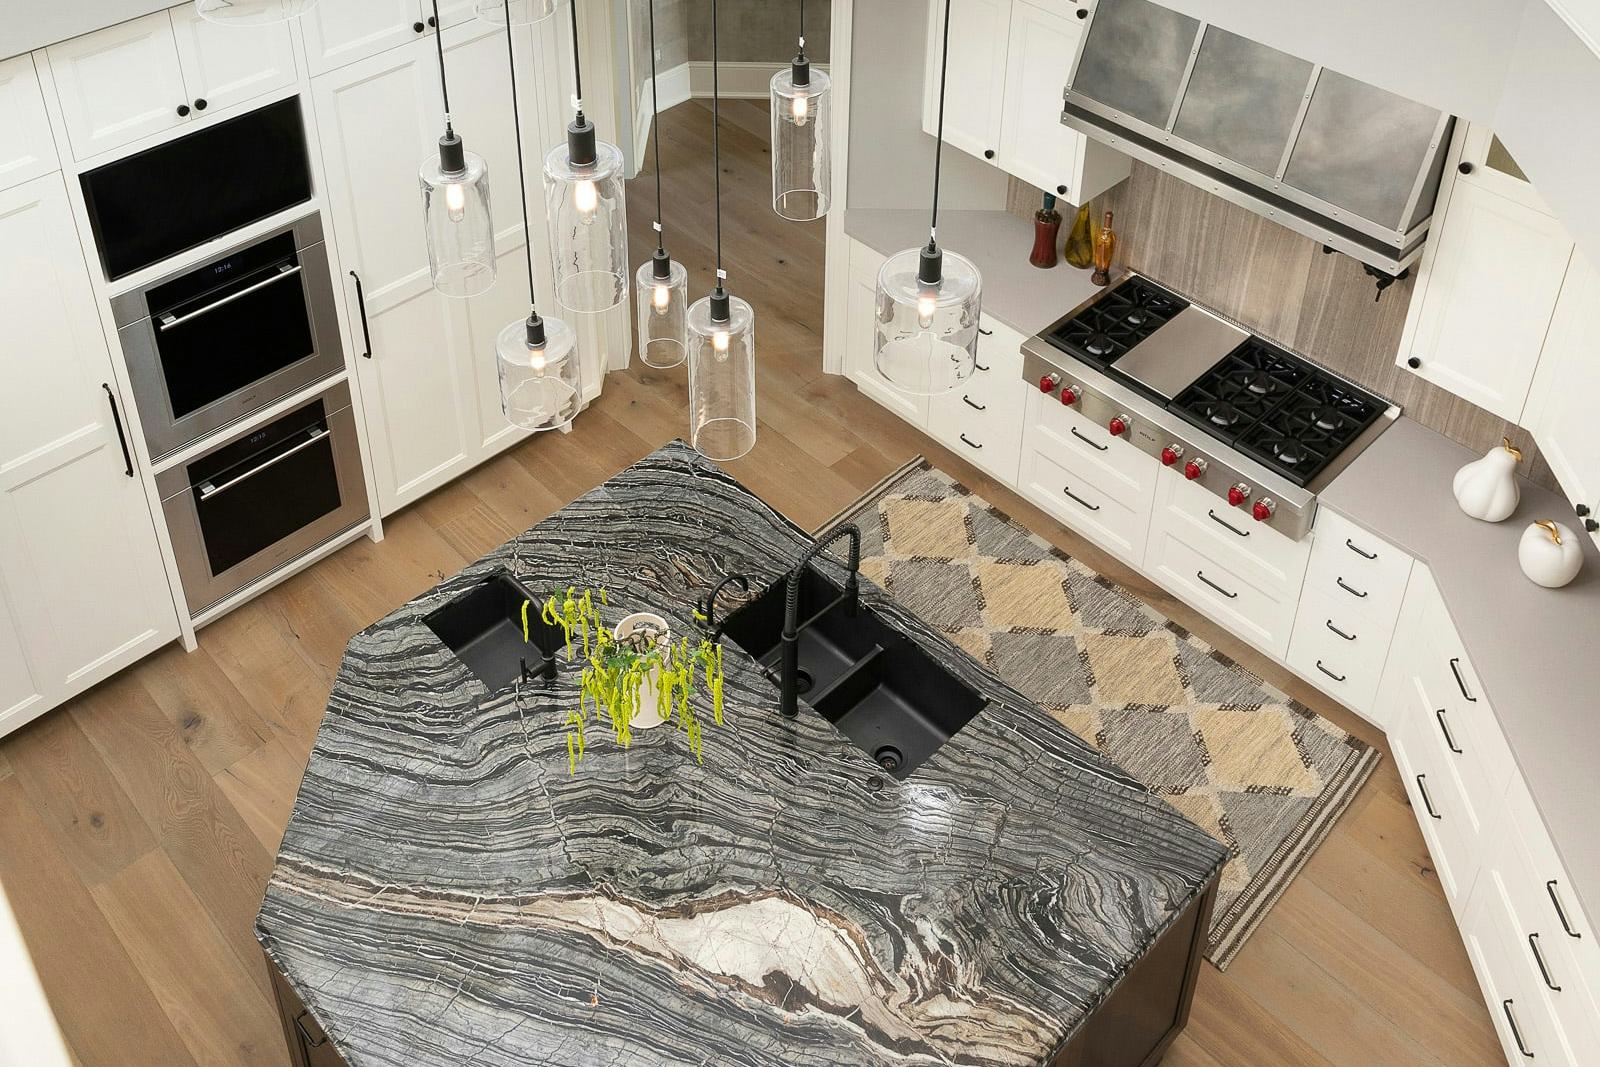 view from above looking at the kitchen, irregular shaped island